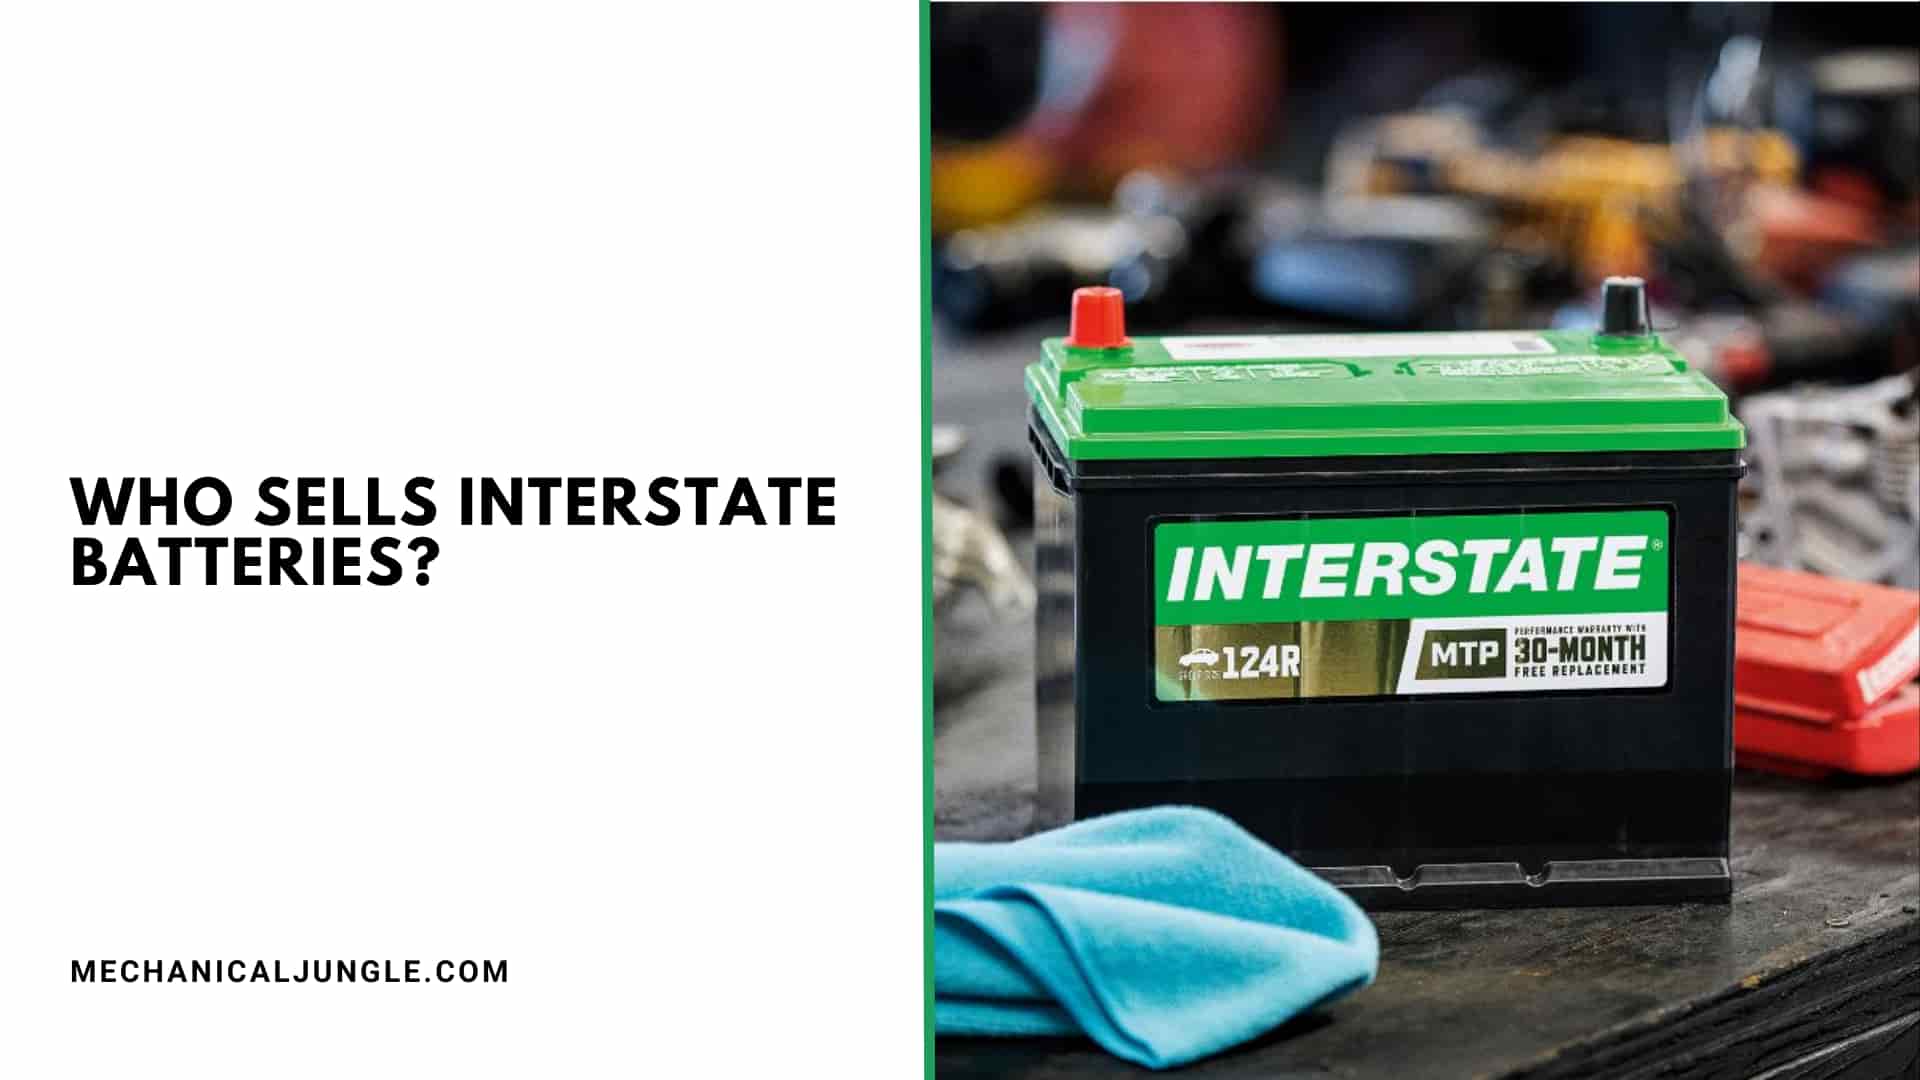 Who Sells Interstate Batteries?